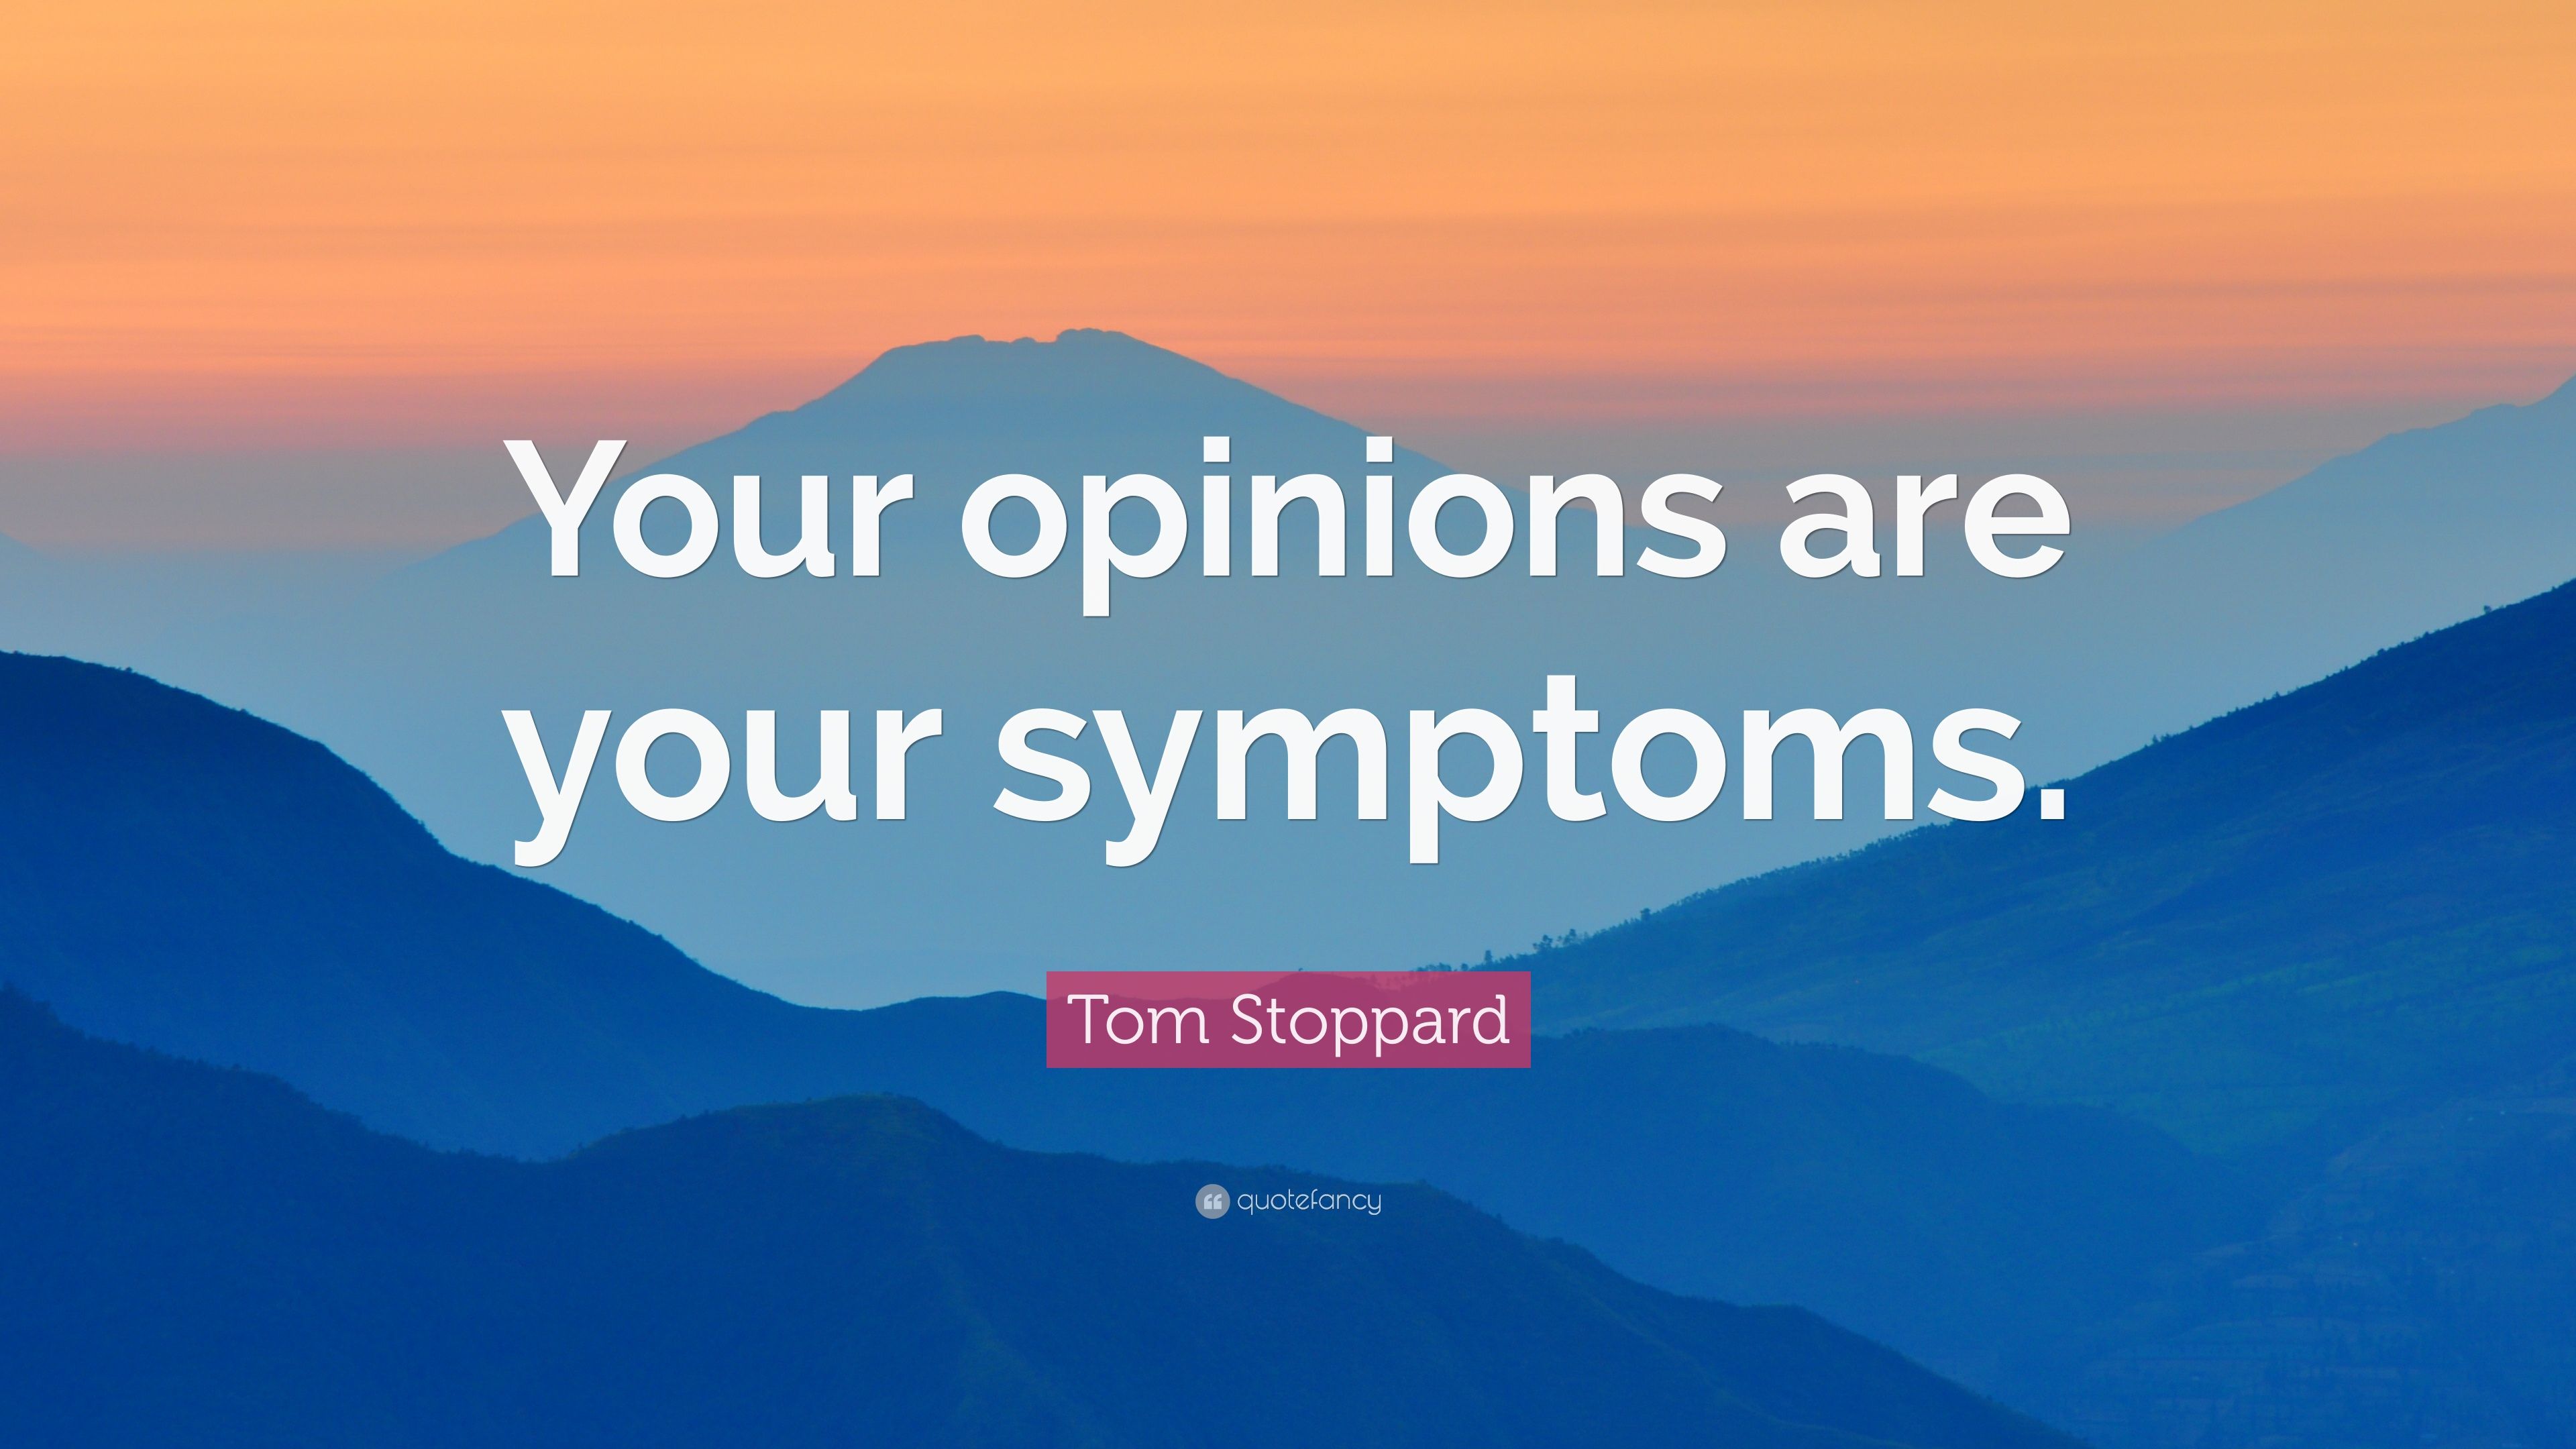 Tom Stoppard Quote: “Your opinions are your symptoms.” 6